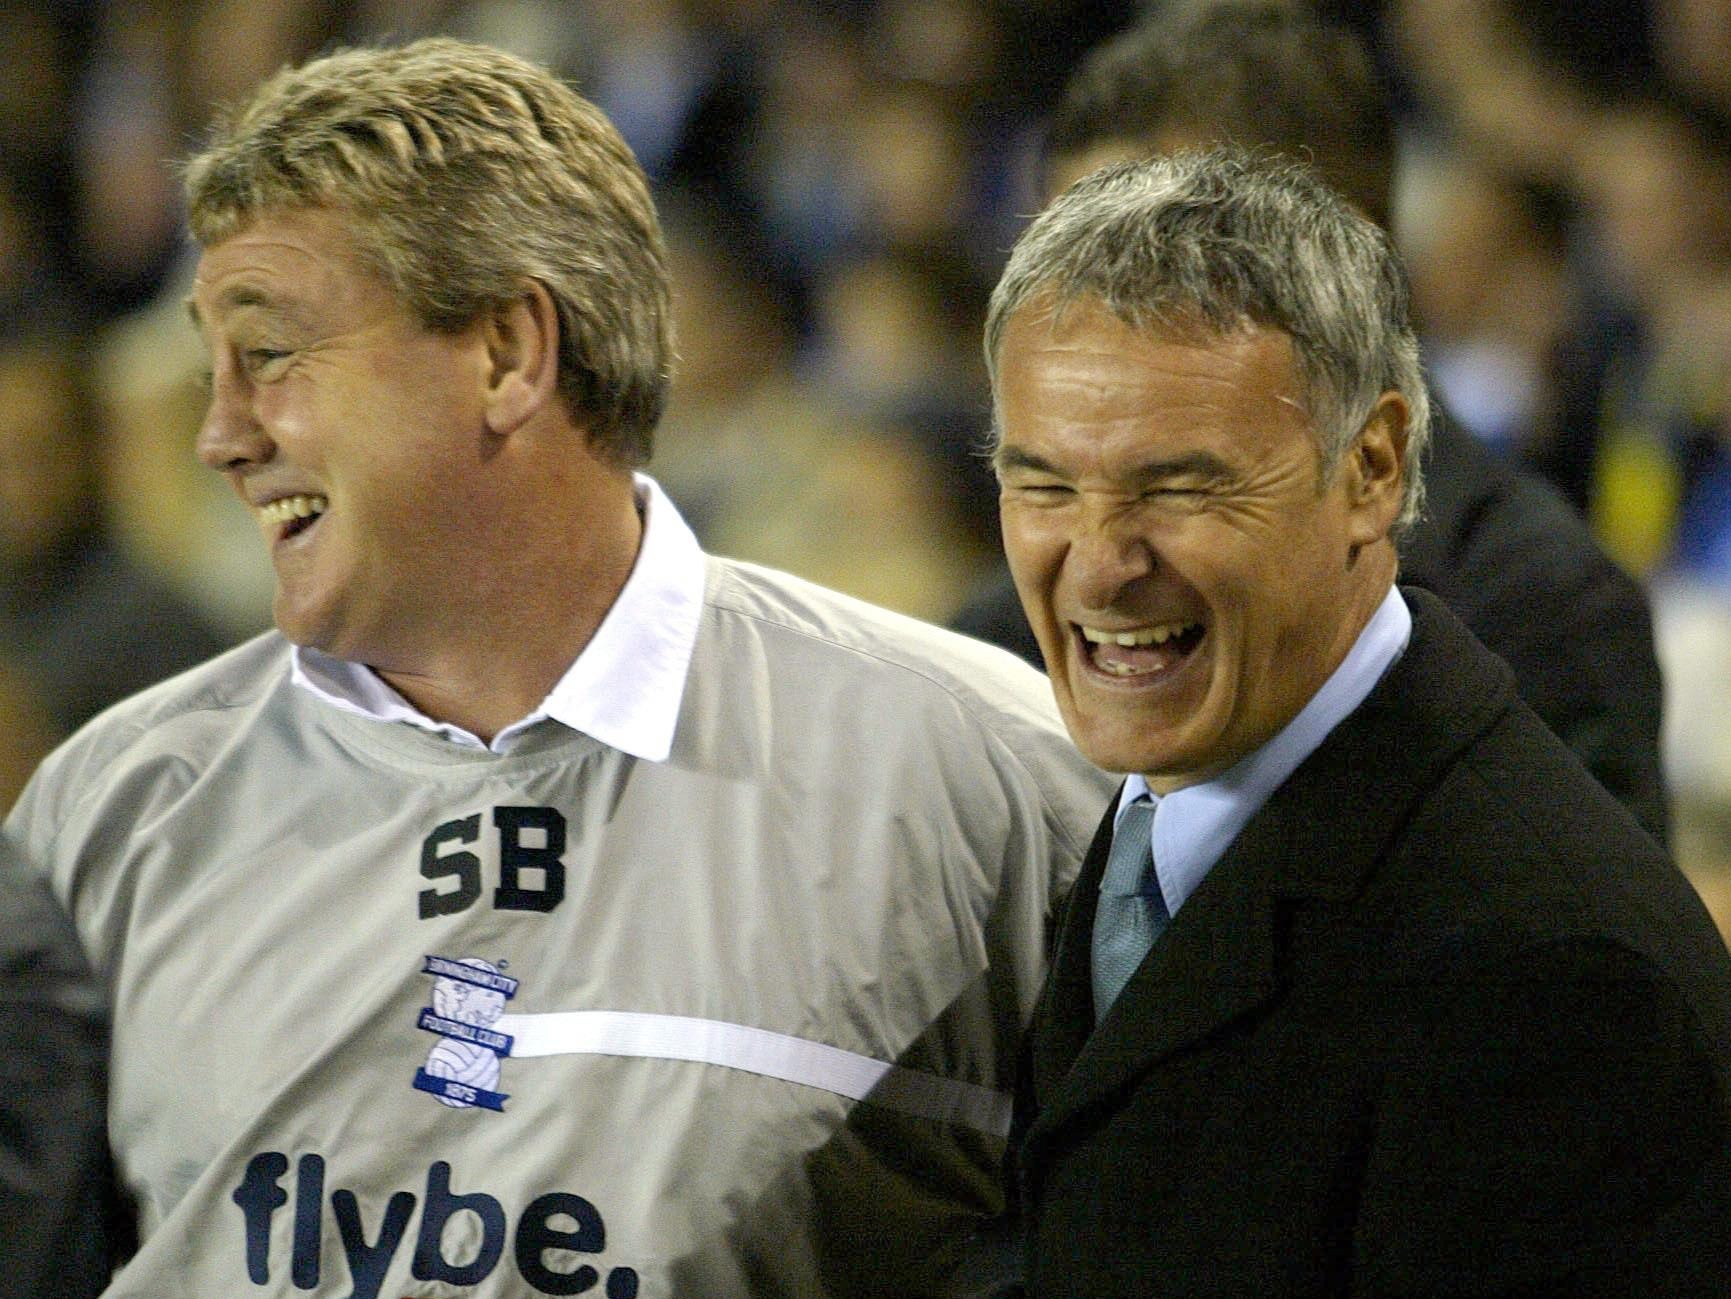 Claudio Ranieri has offered Steve Bruce support after his Newcastle exit